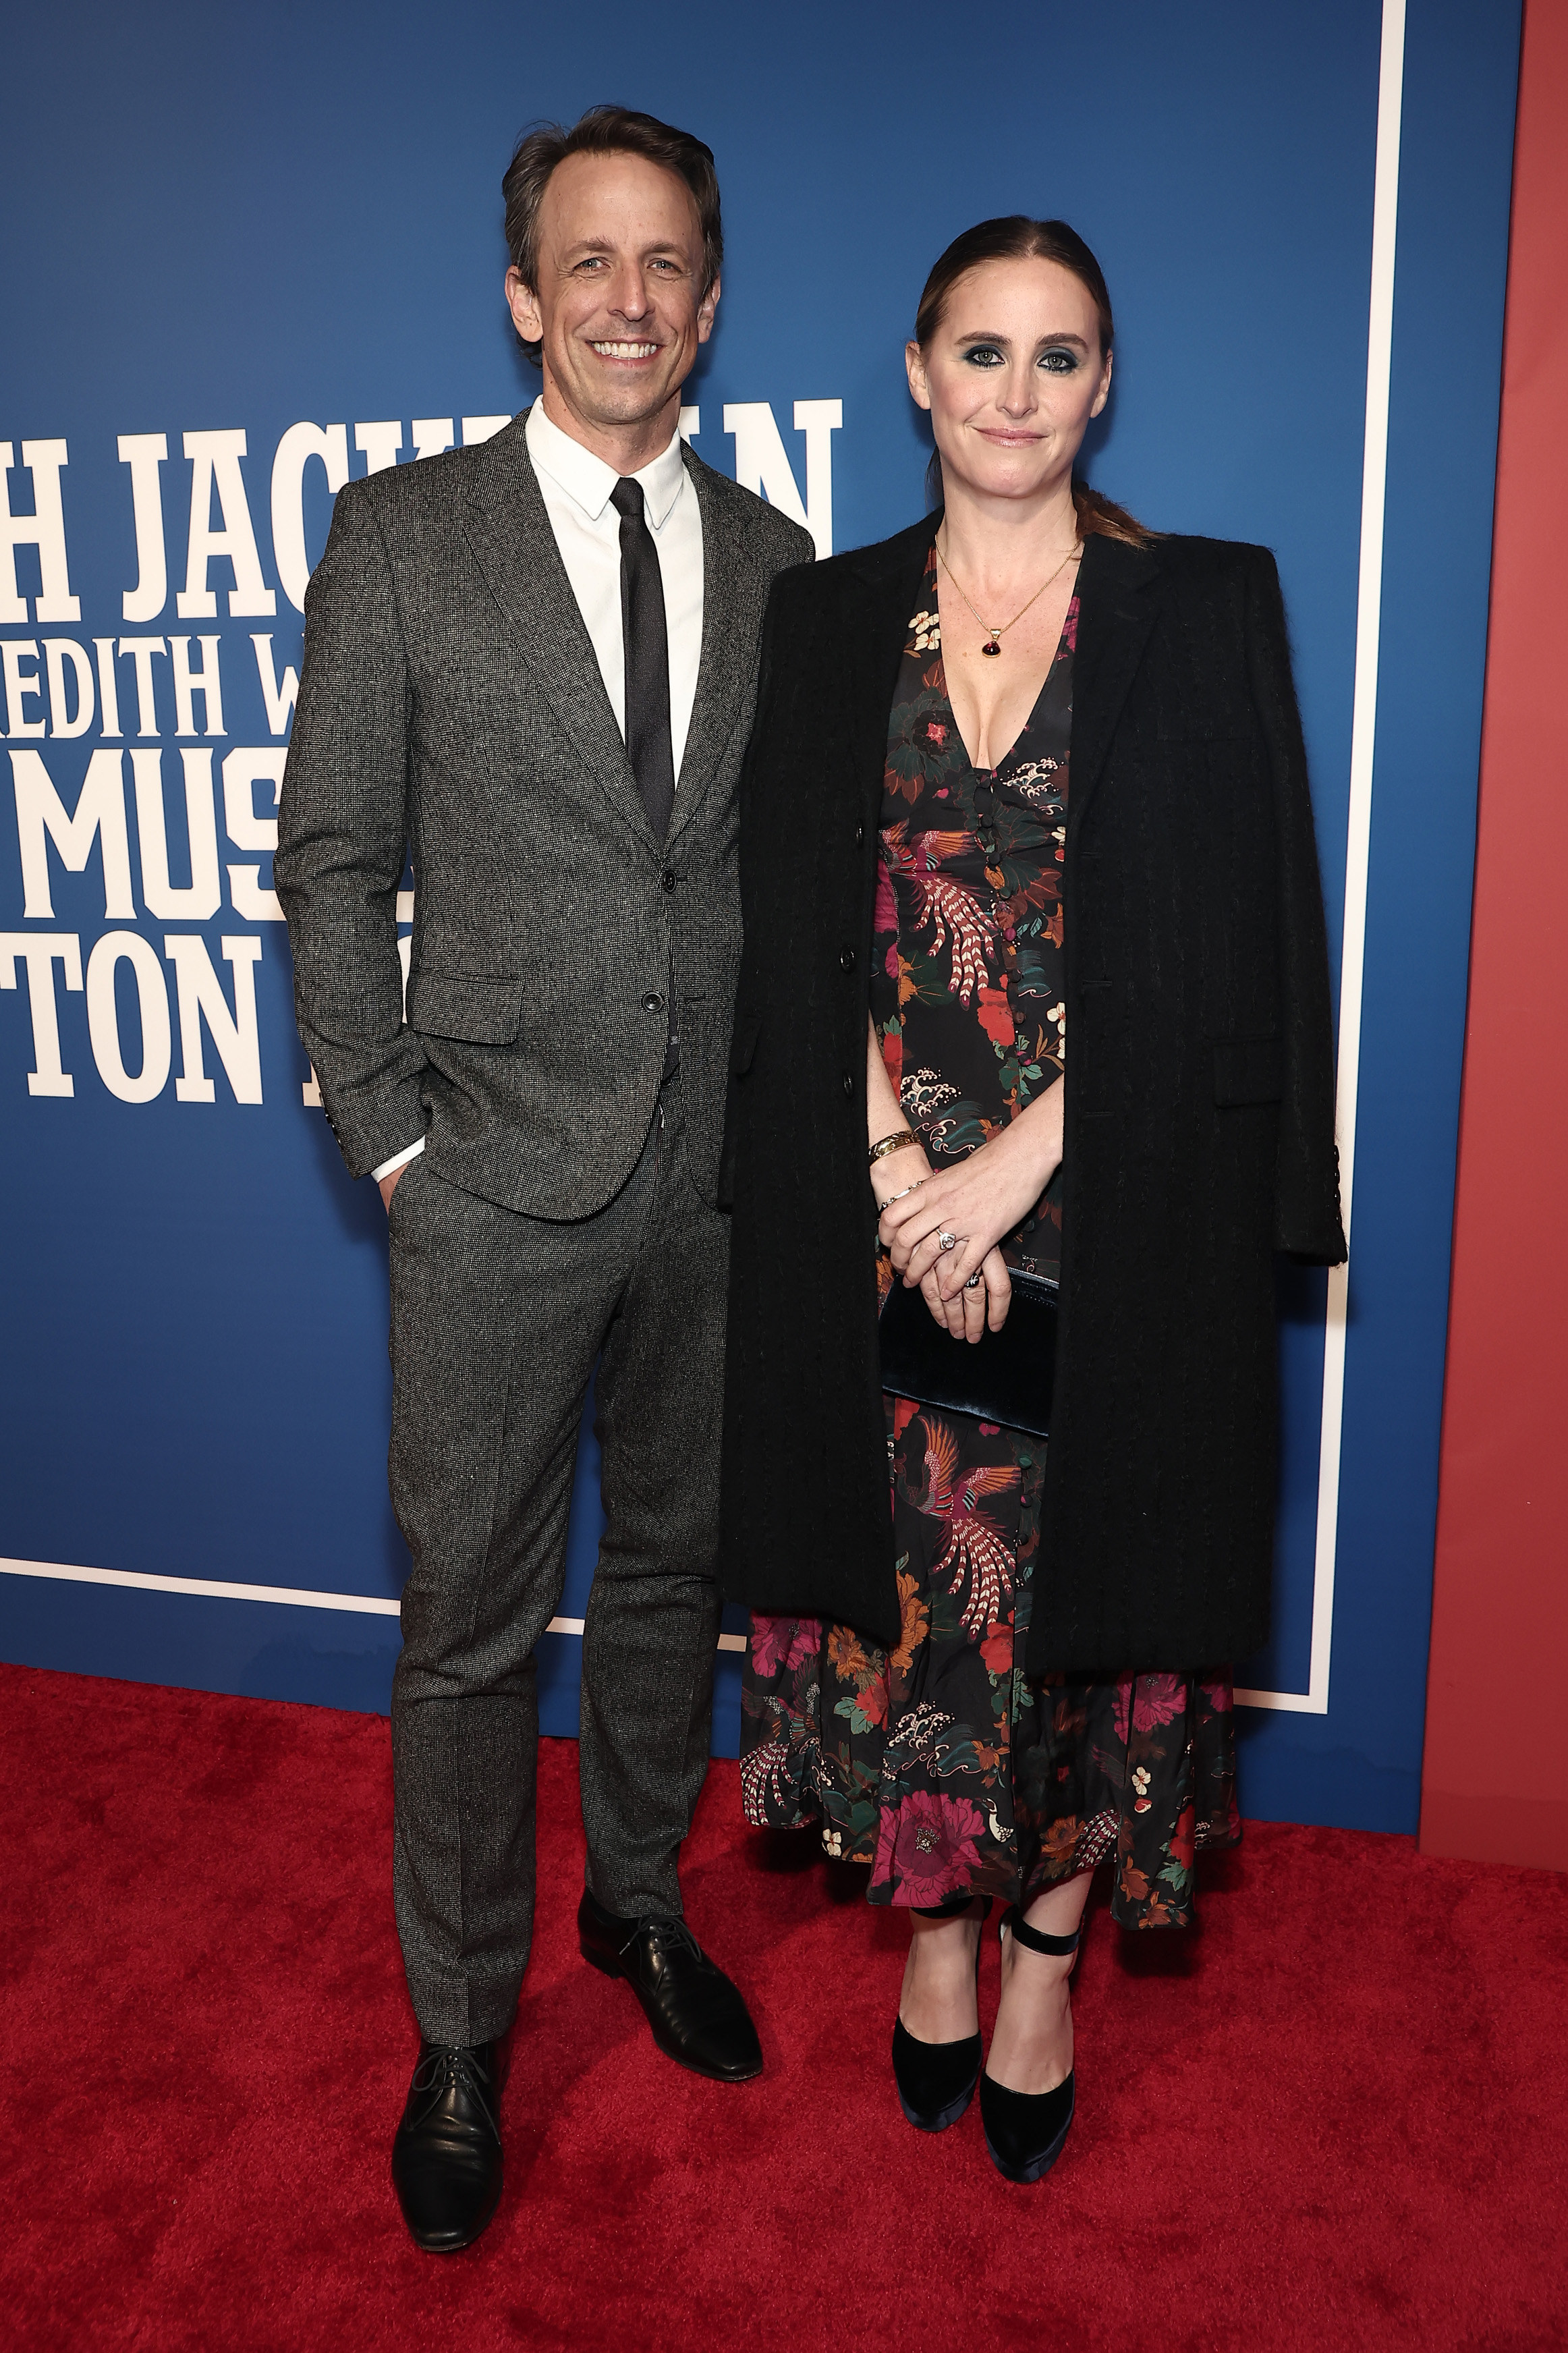 Seth and his wife on the red carpet